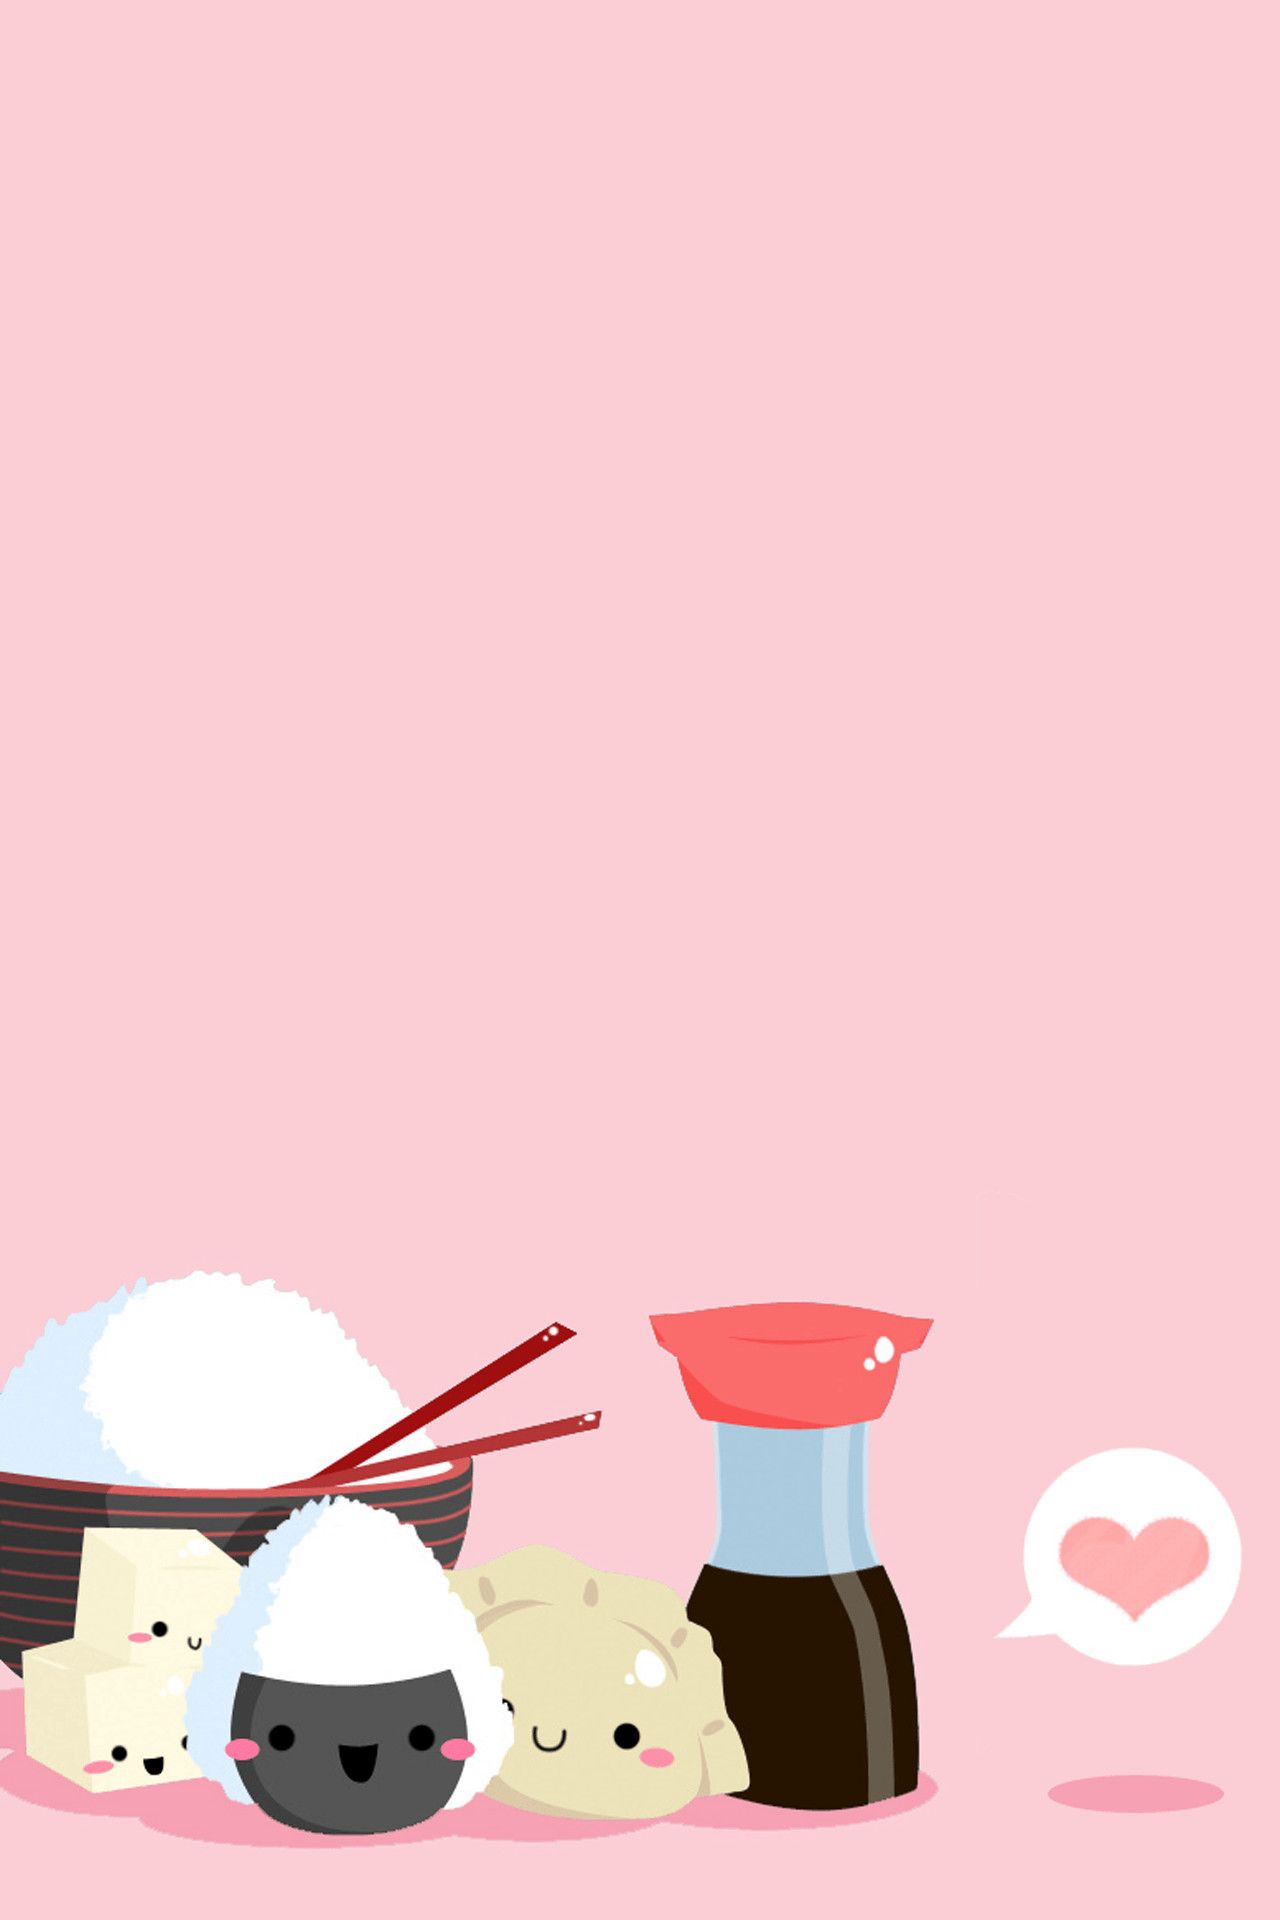 Sushi wallpaper for phone with cute sushi characters on a pink background - Japanese